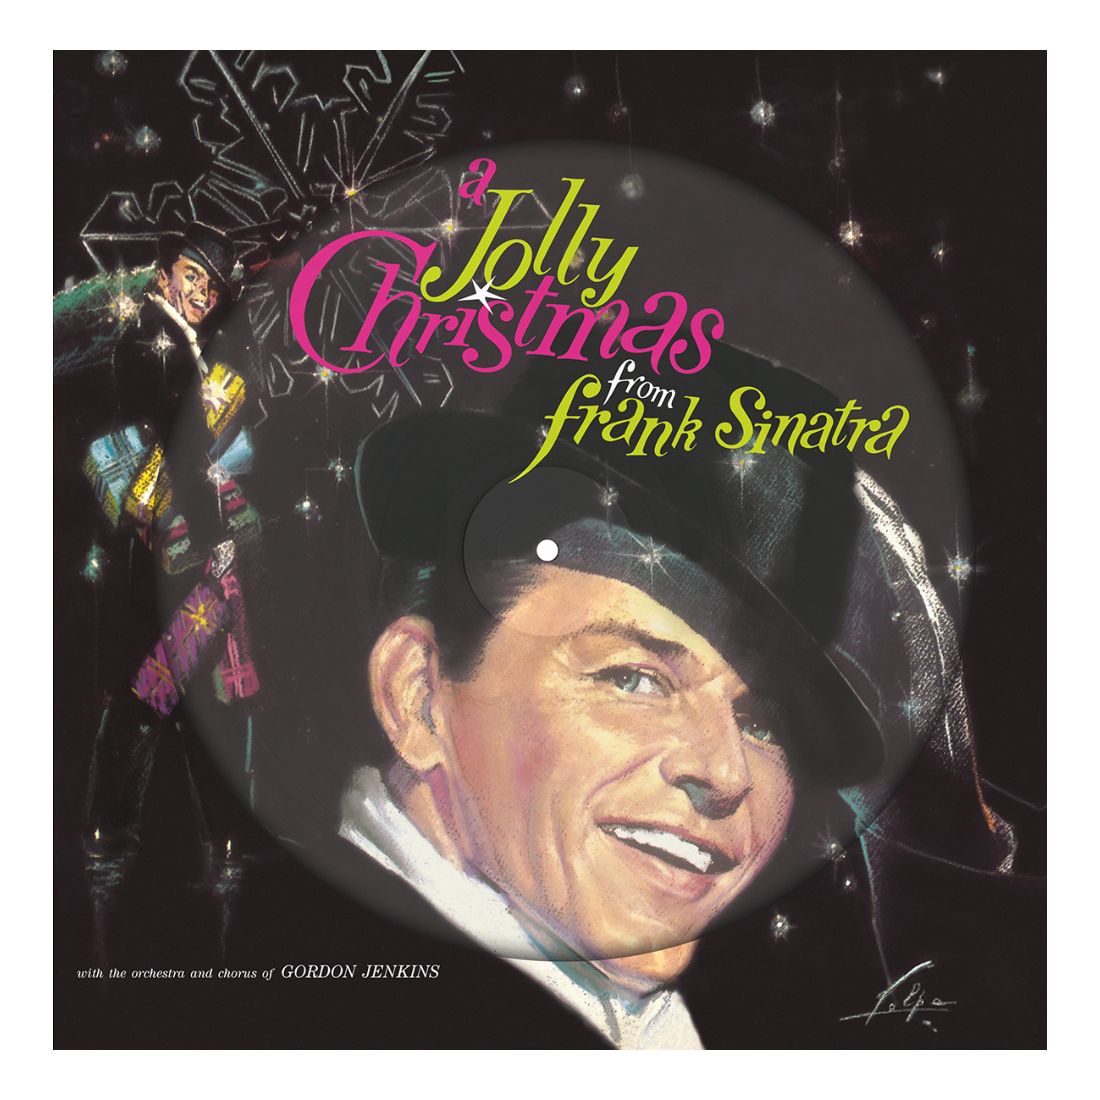 Виниловая пластинка A Jolly Christmas from Frank Sinatra (Picture Disc) | Frank Sinatra sinatra frank виниловая пластинка sinatra frank a jolly christmas gold